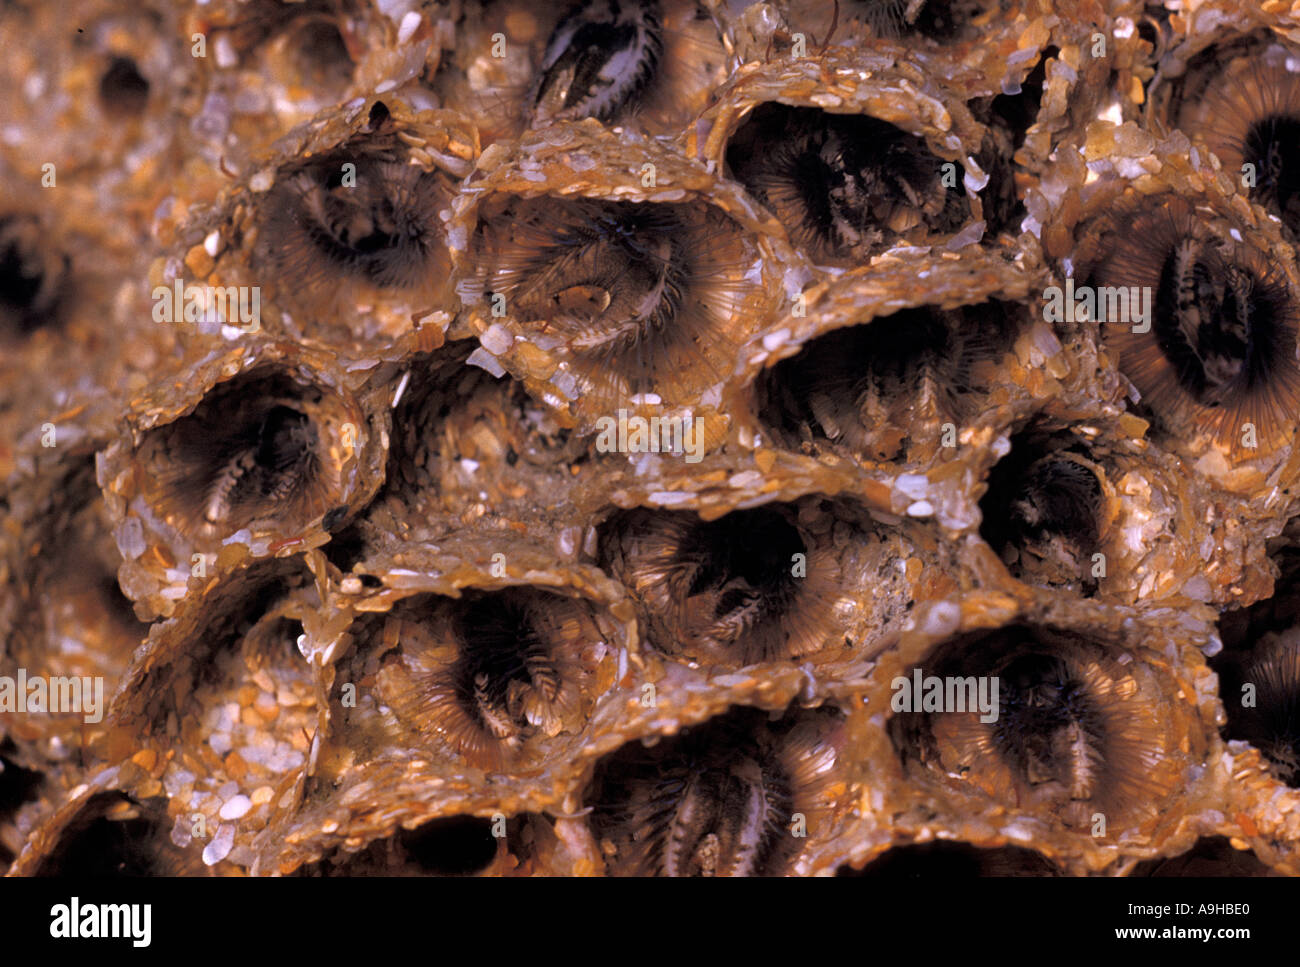 Honeycomb Worm Sabellaria alveolata Heads of worms at mouths of tubes underwater Stock Photo